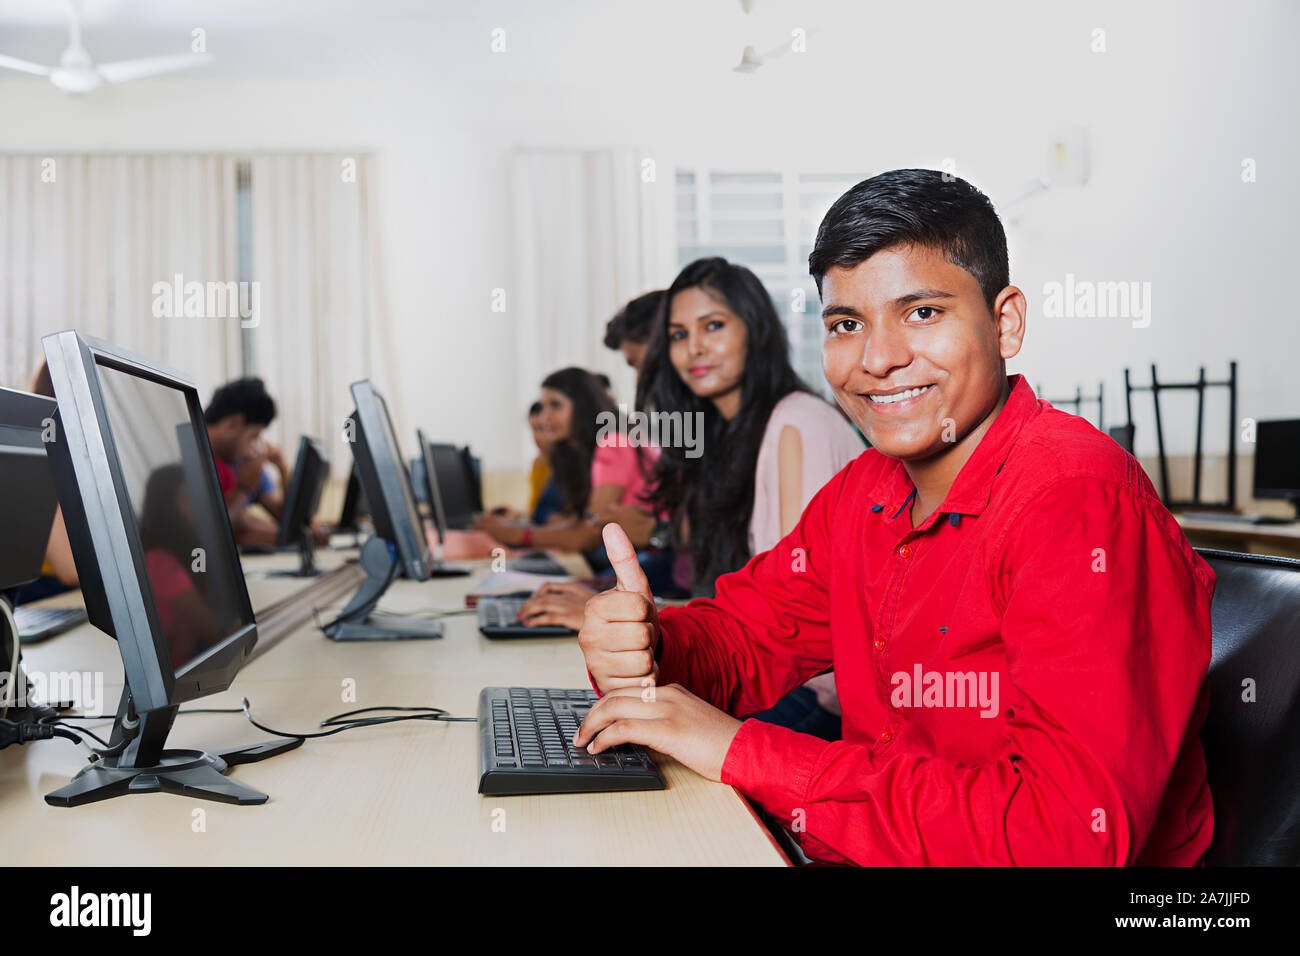 Young Boy College Student Showing Thmbs-up With Computer At computer Classroom Stock Photo